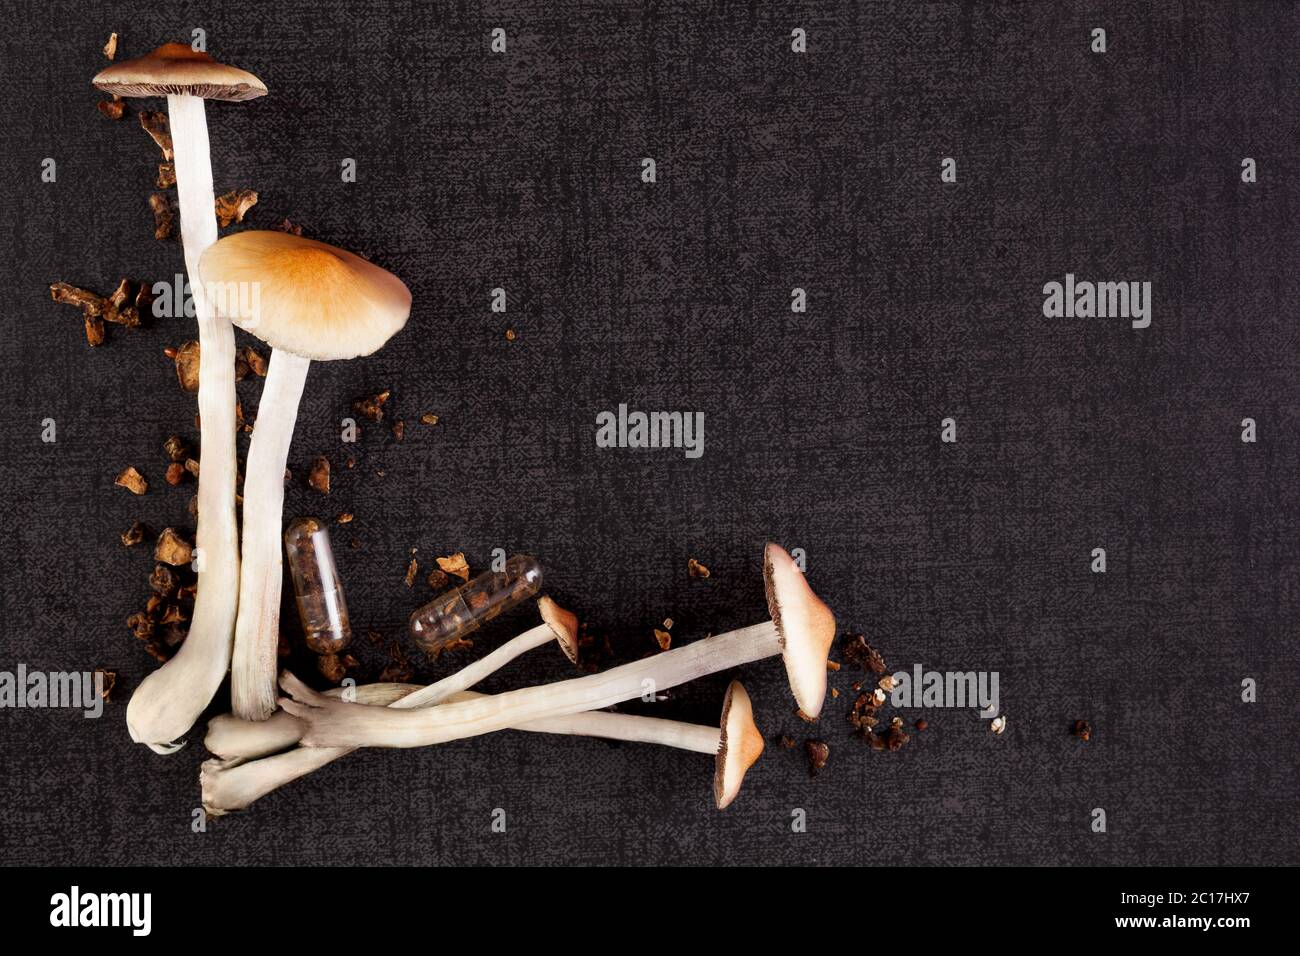 Psychedelic mushrooms with copy space. Stock Photo